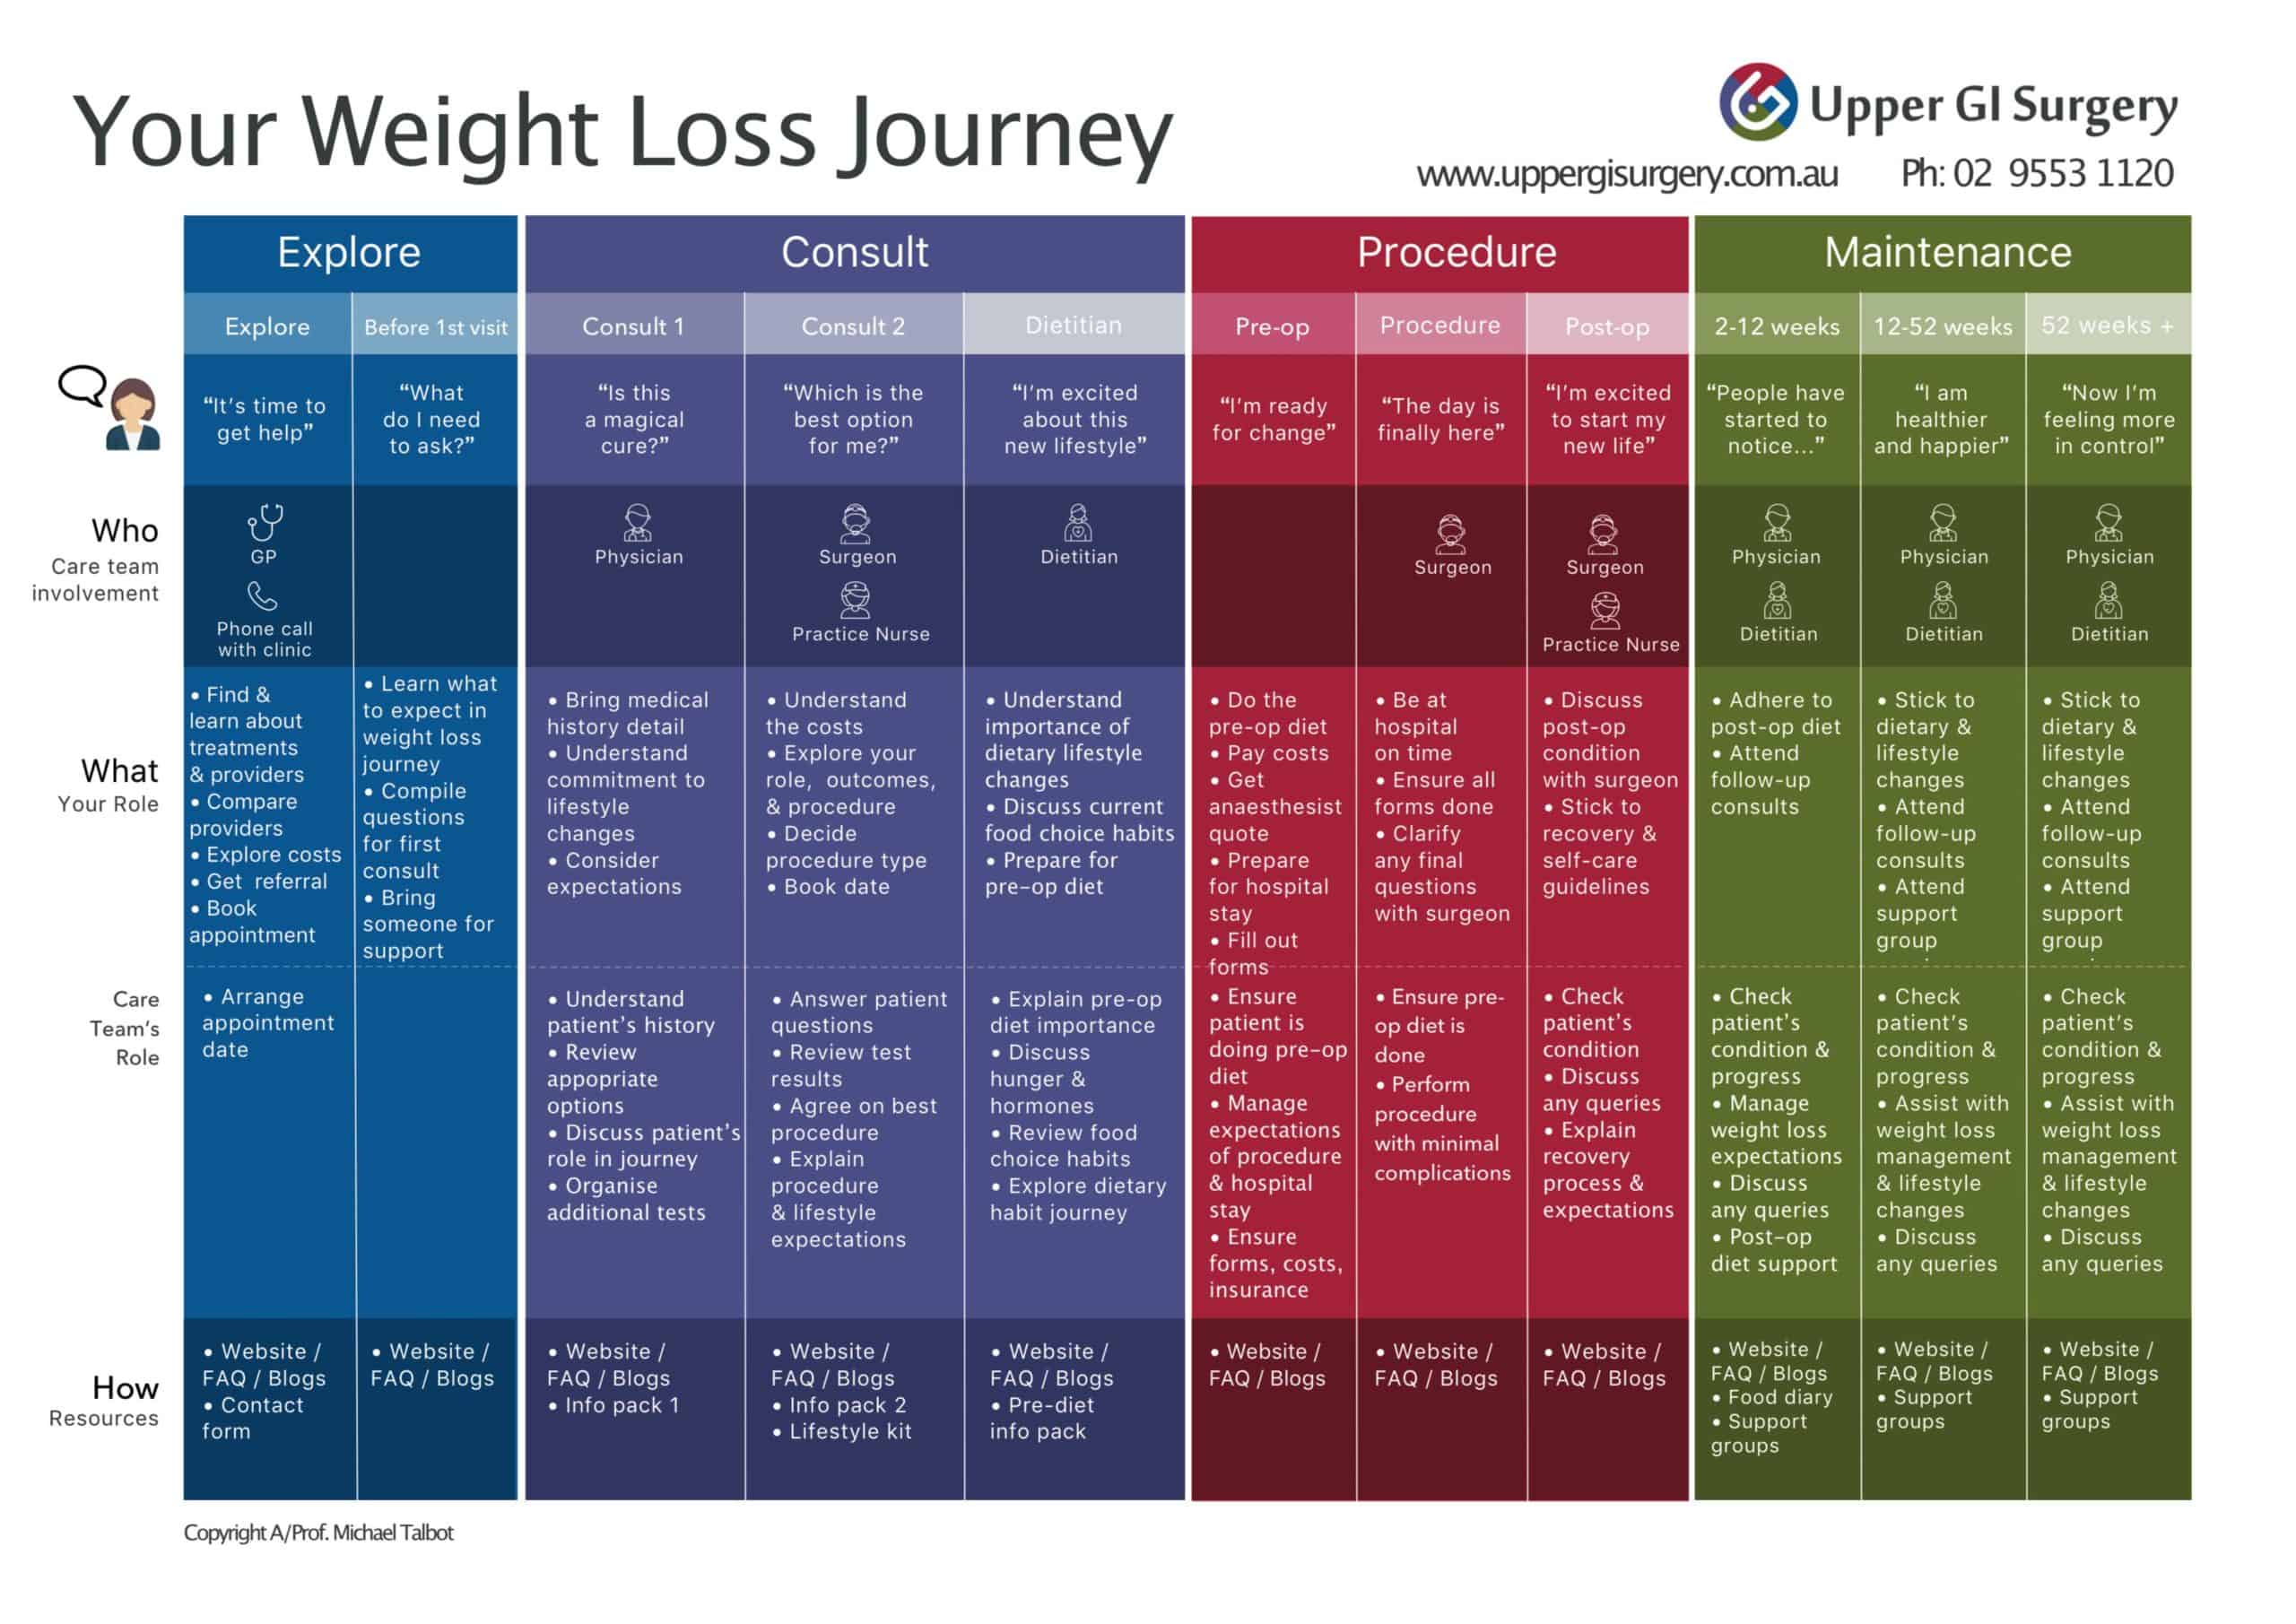 Weight Loss Journey for UGIS patients